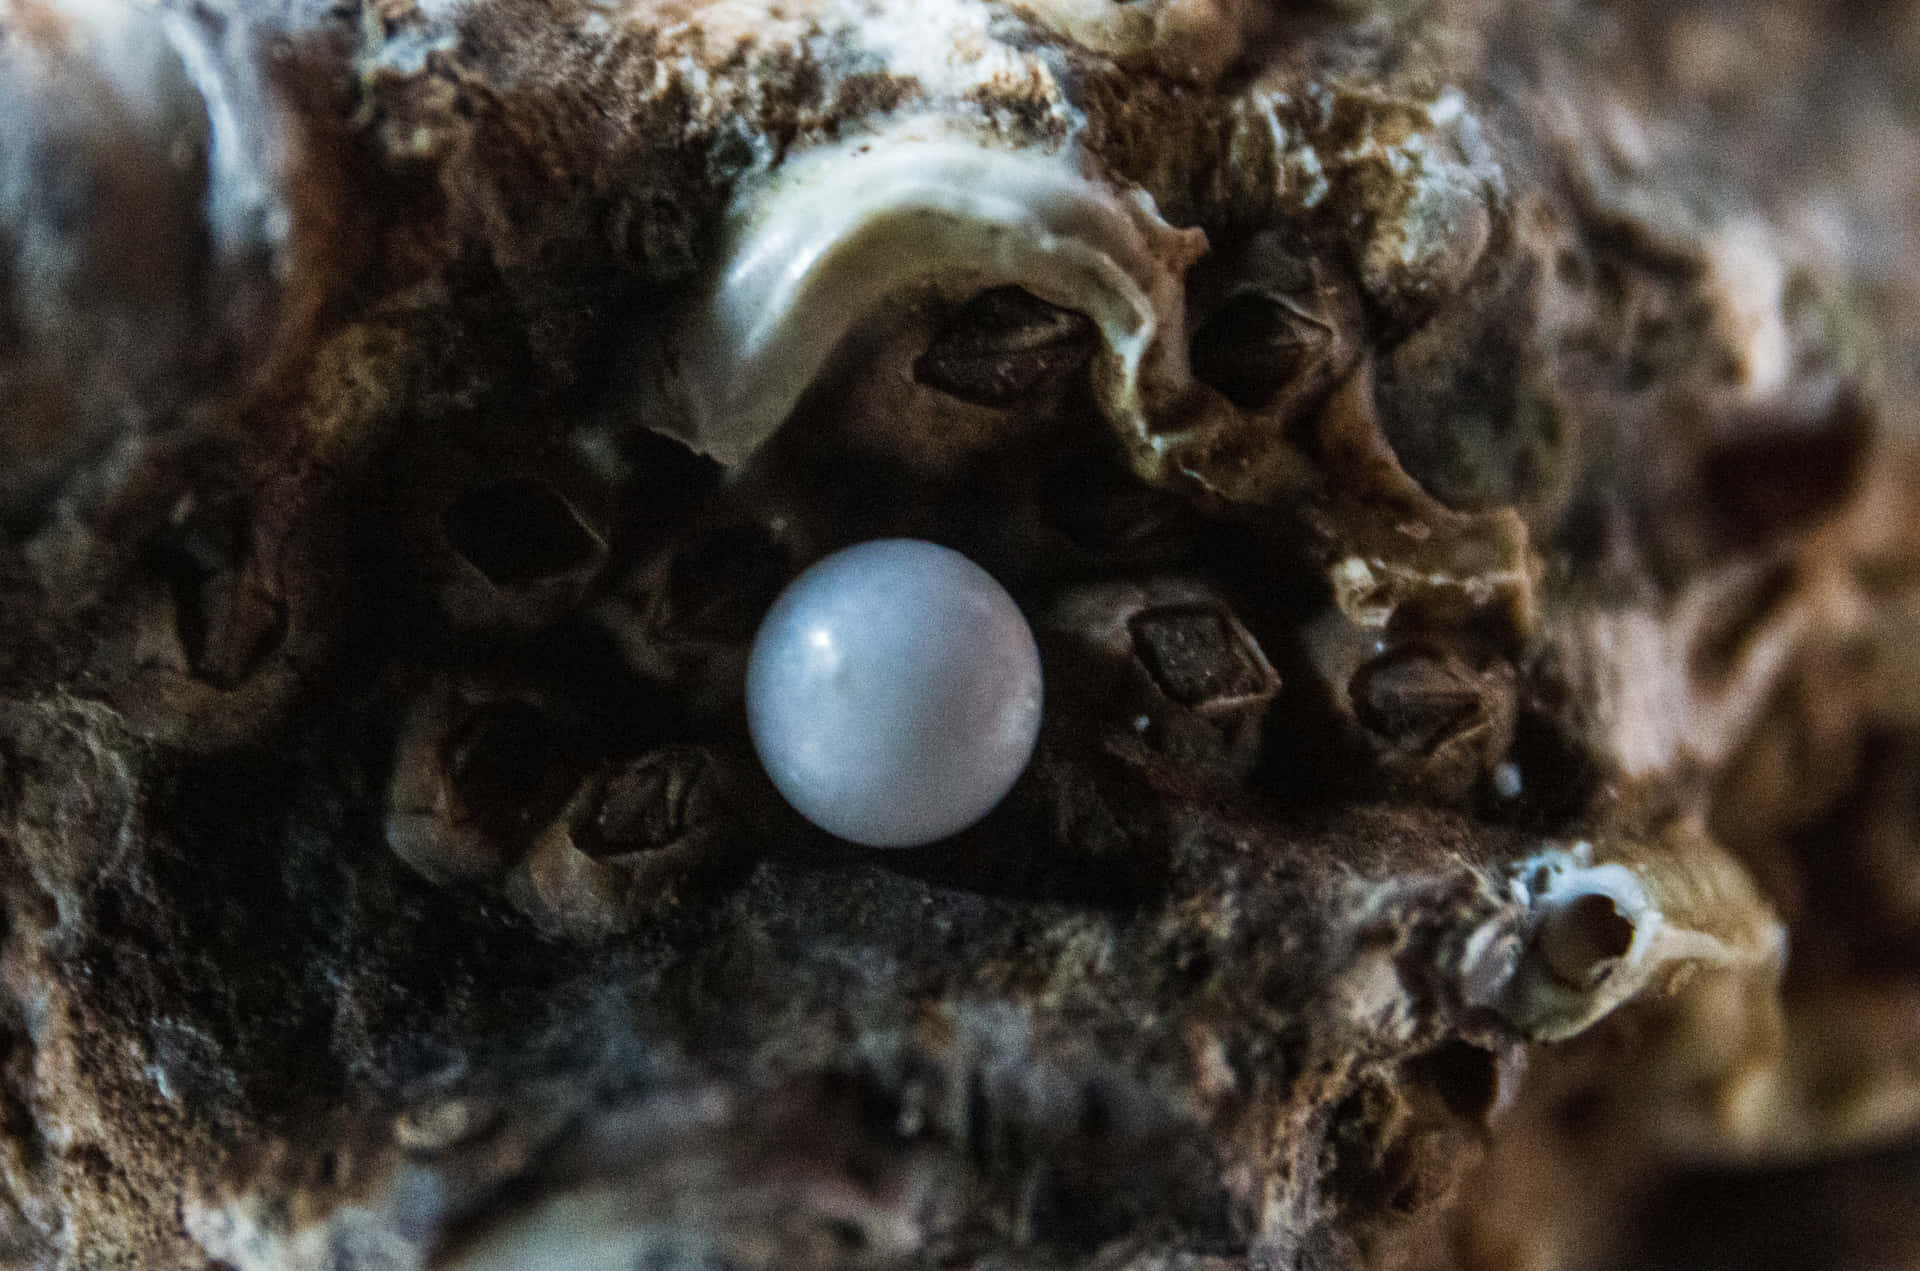 Natural Pearl Formed Inside an Oyster